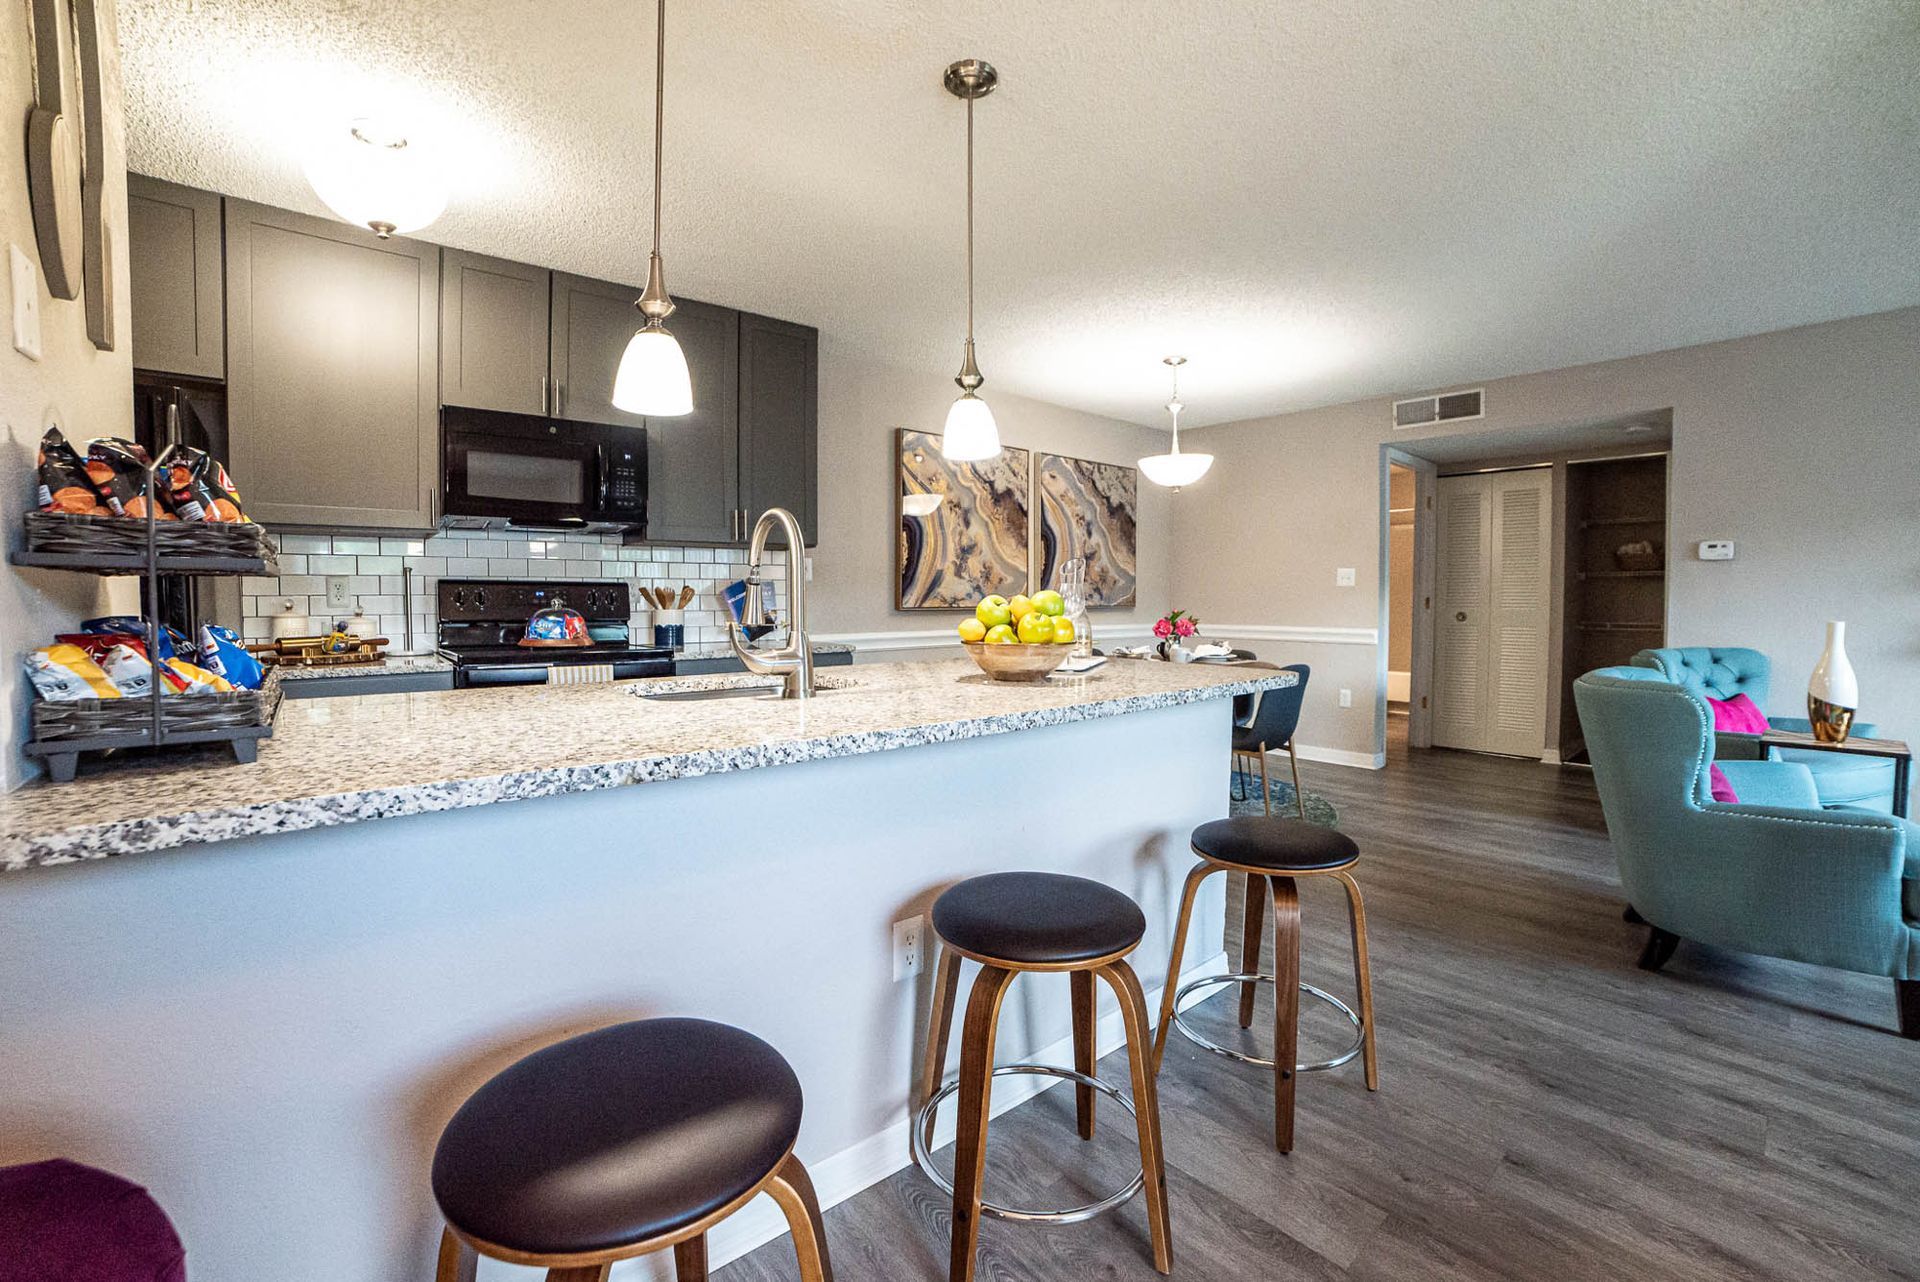 A kitchen with granite counter tops and stools in a living room at Trellis at The Lakes.